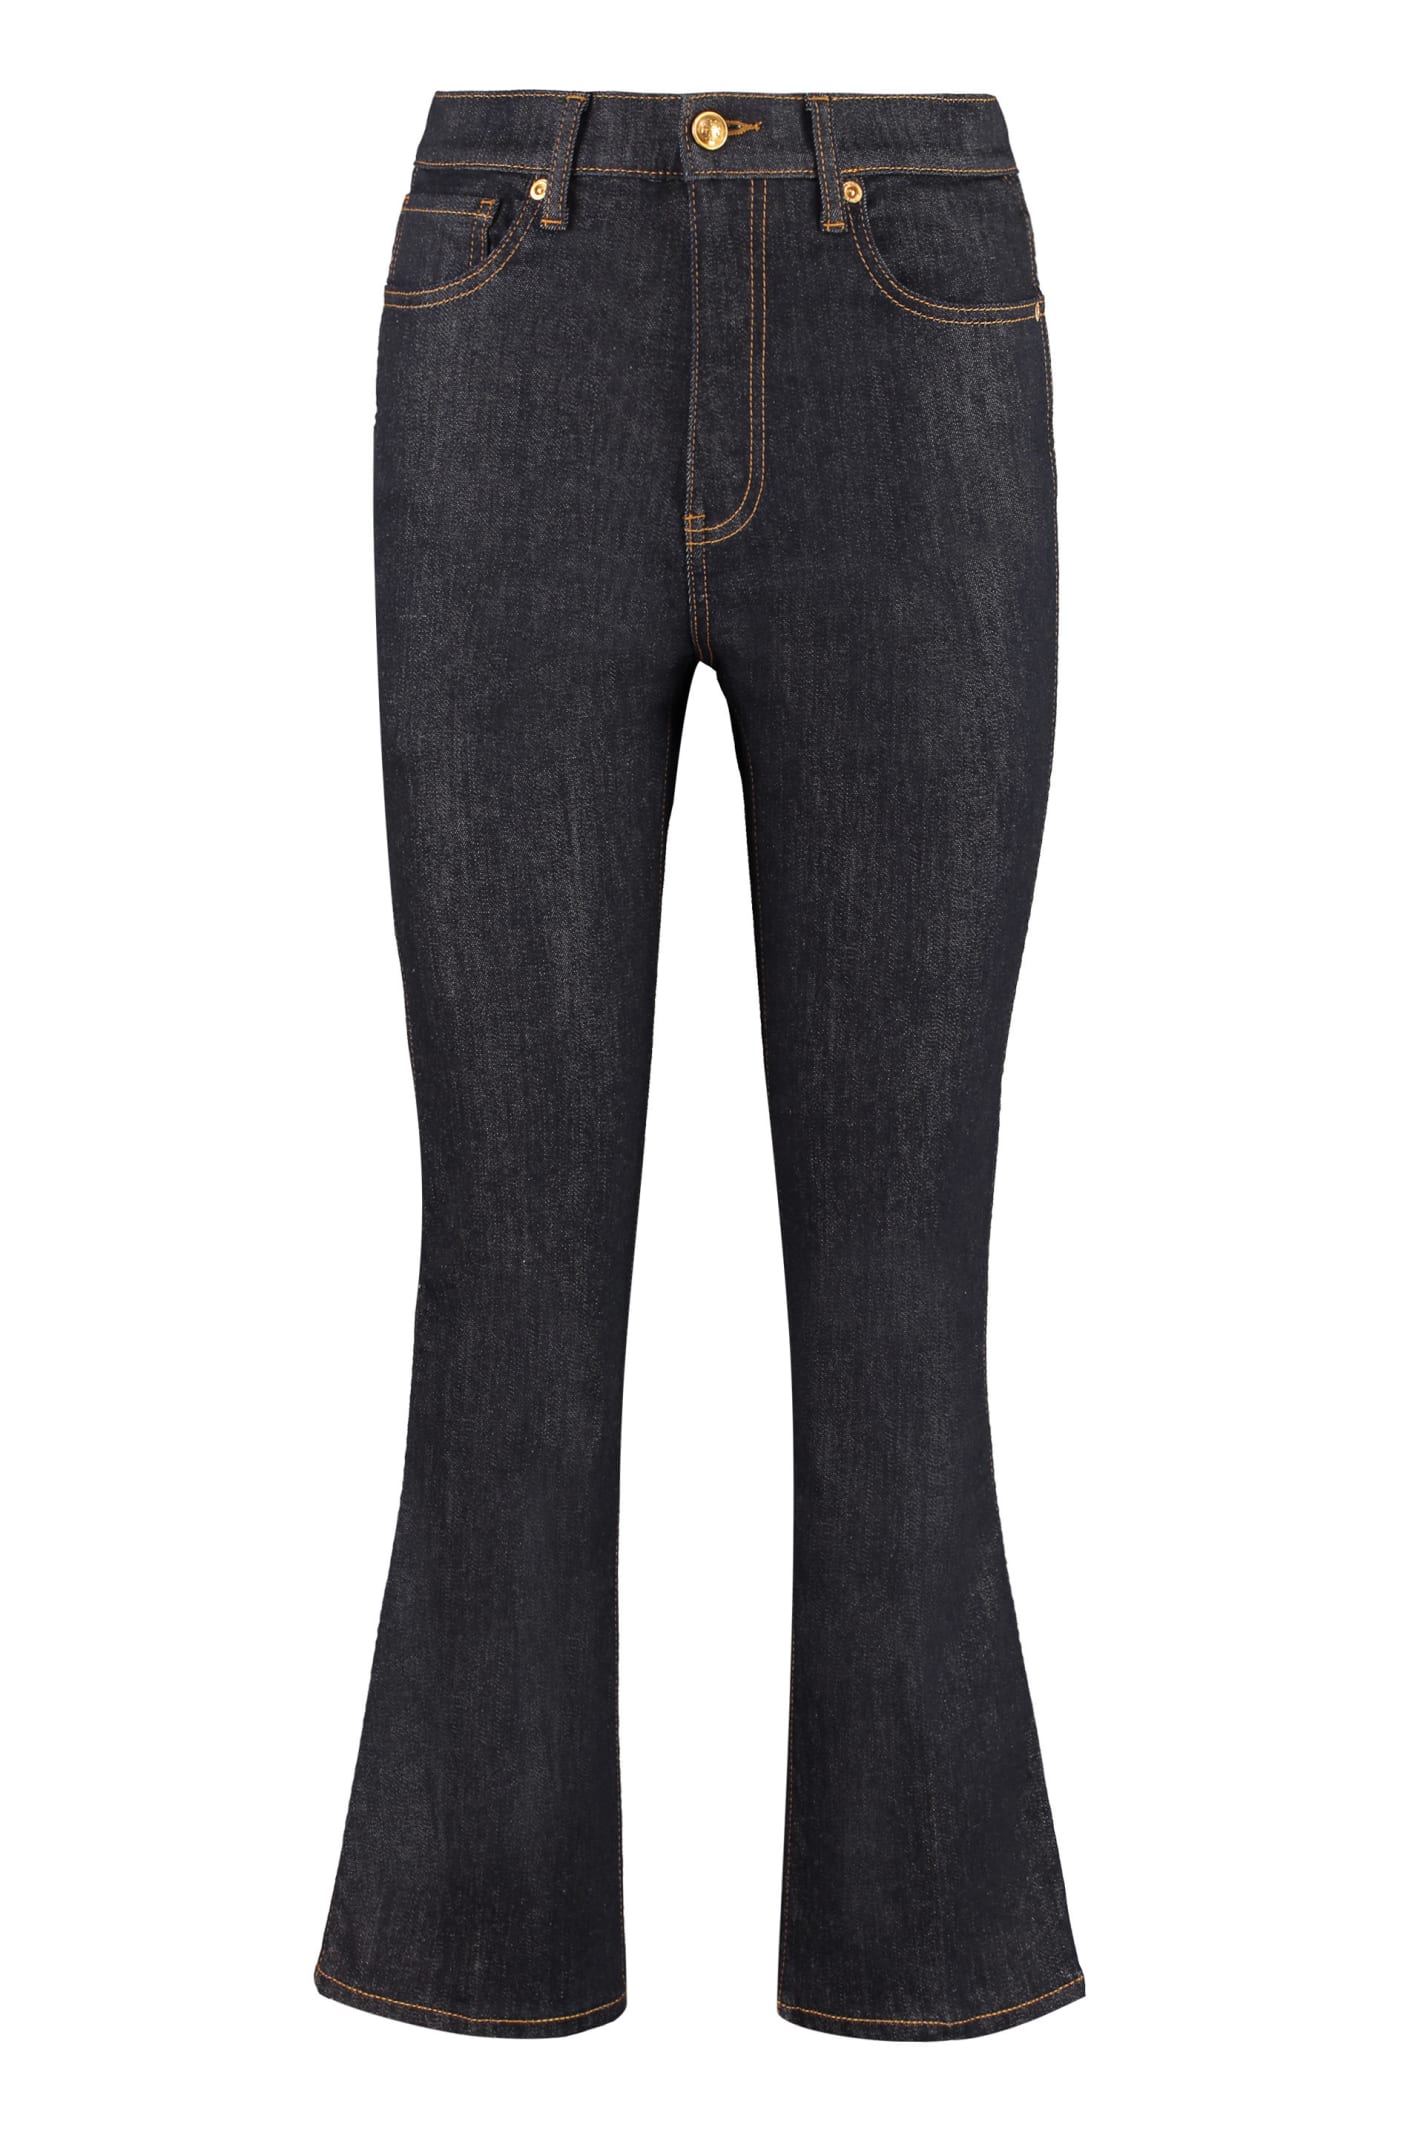 Tory Burch Cropped Boot-cut Jeans